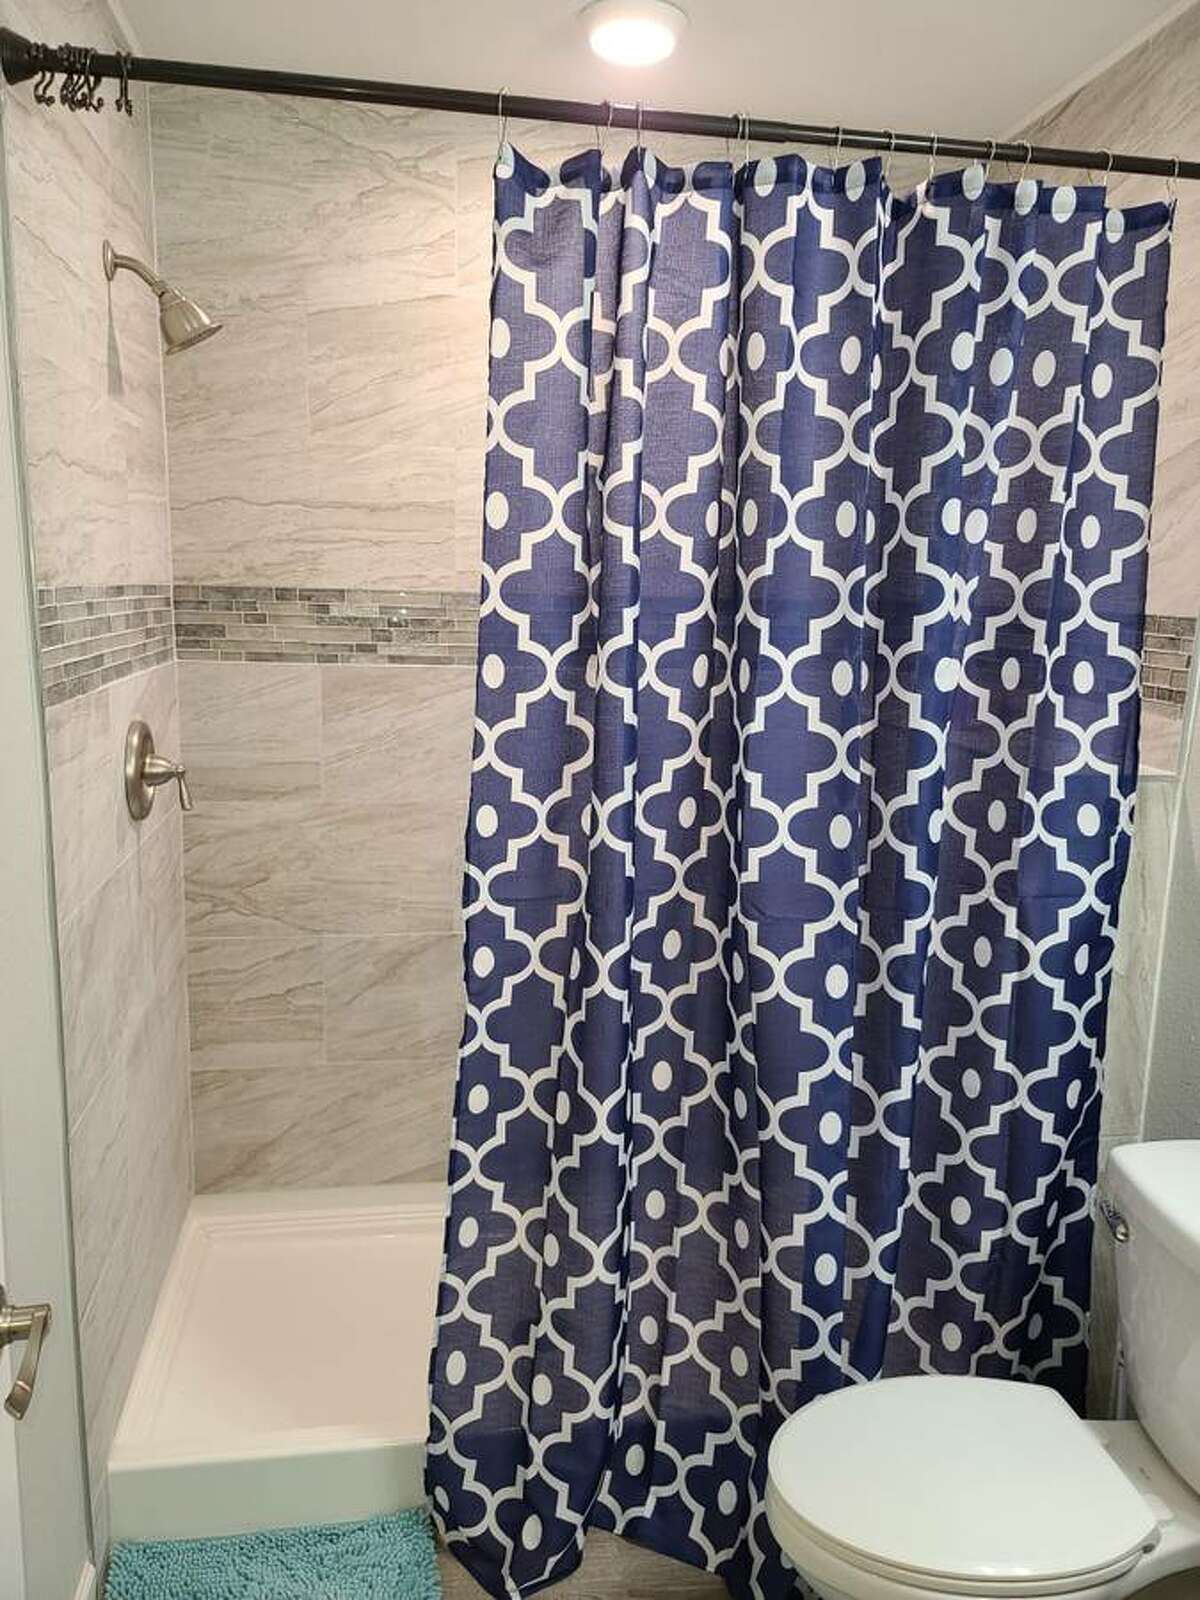 The bathroom has a walk-in shower lined with granite tiles.